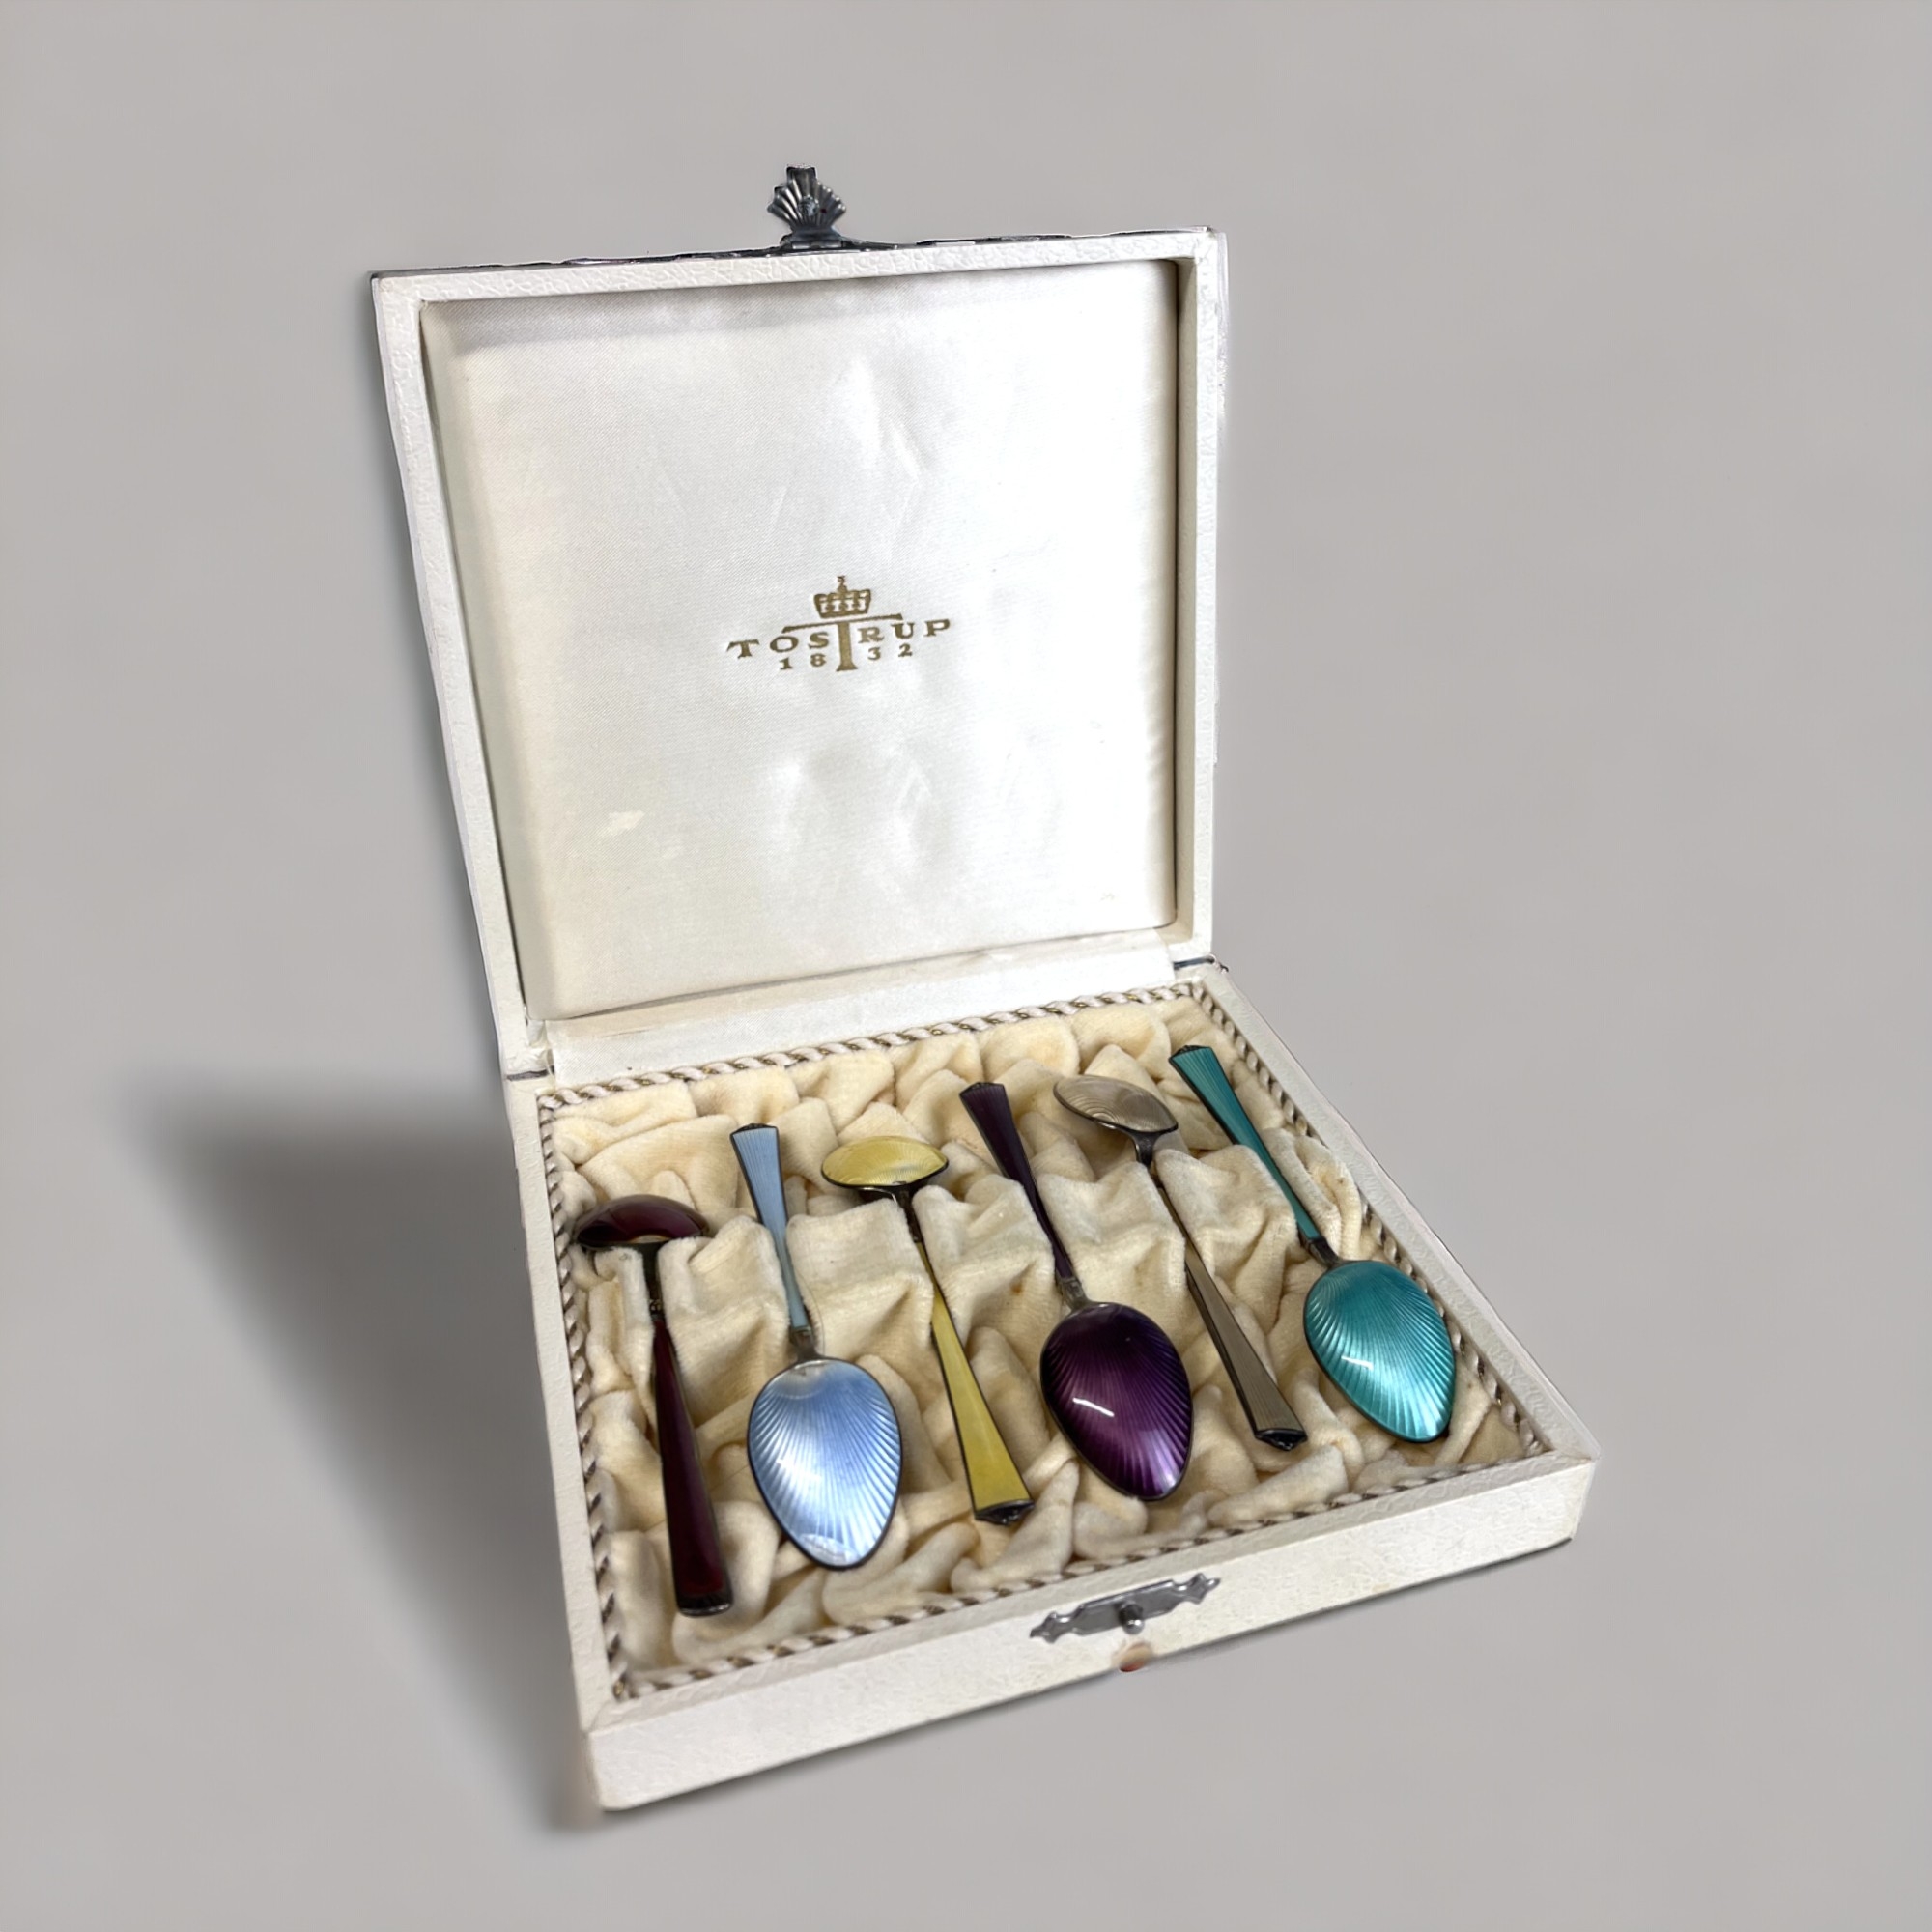 A SET OF FIVE MAGNUS AASE (NORWAY) SILVER ENAMEL SPOONS. Married with a Tostrup box and one